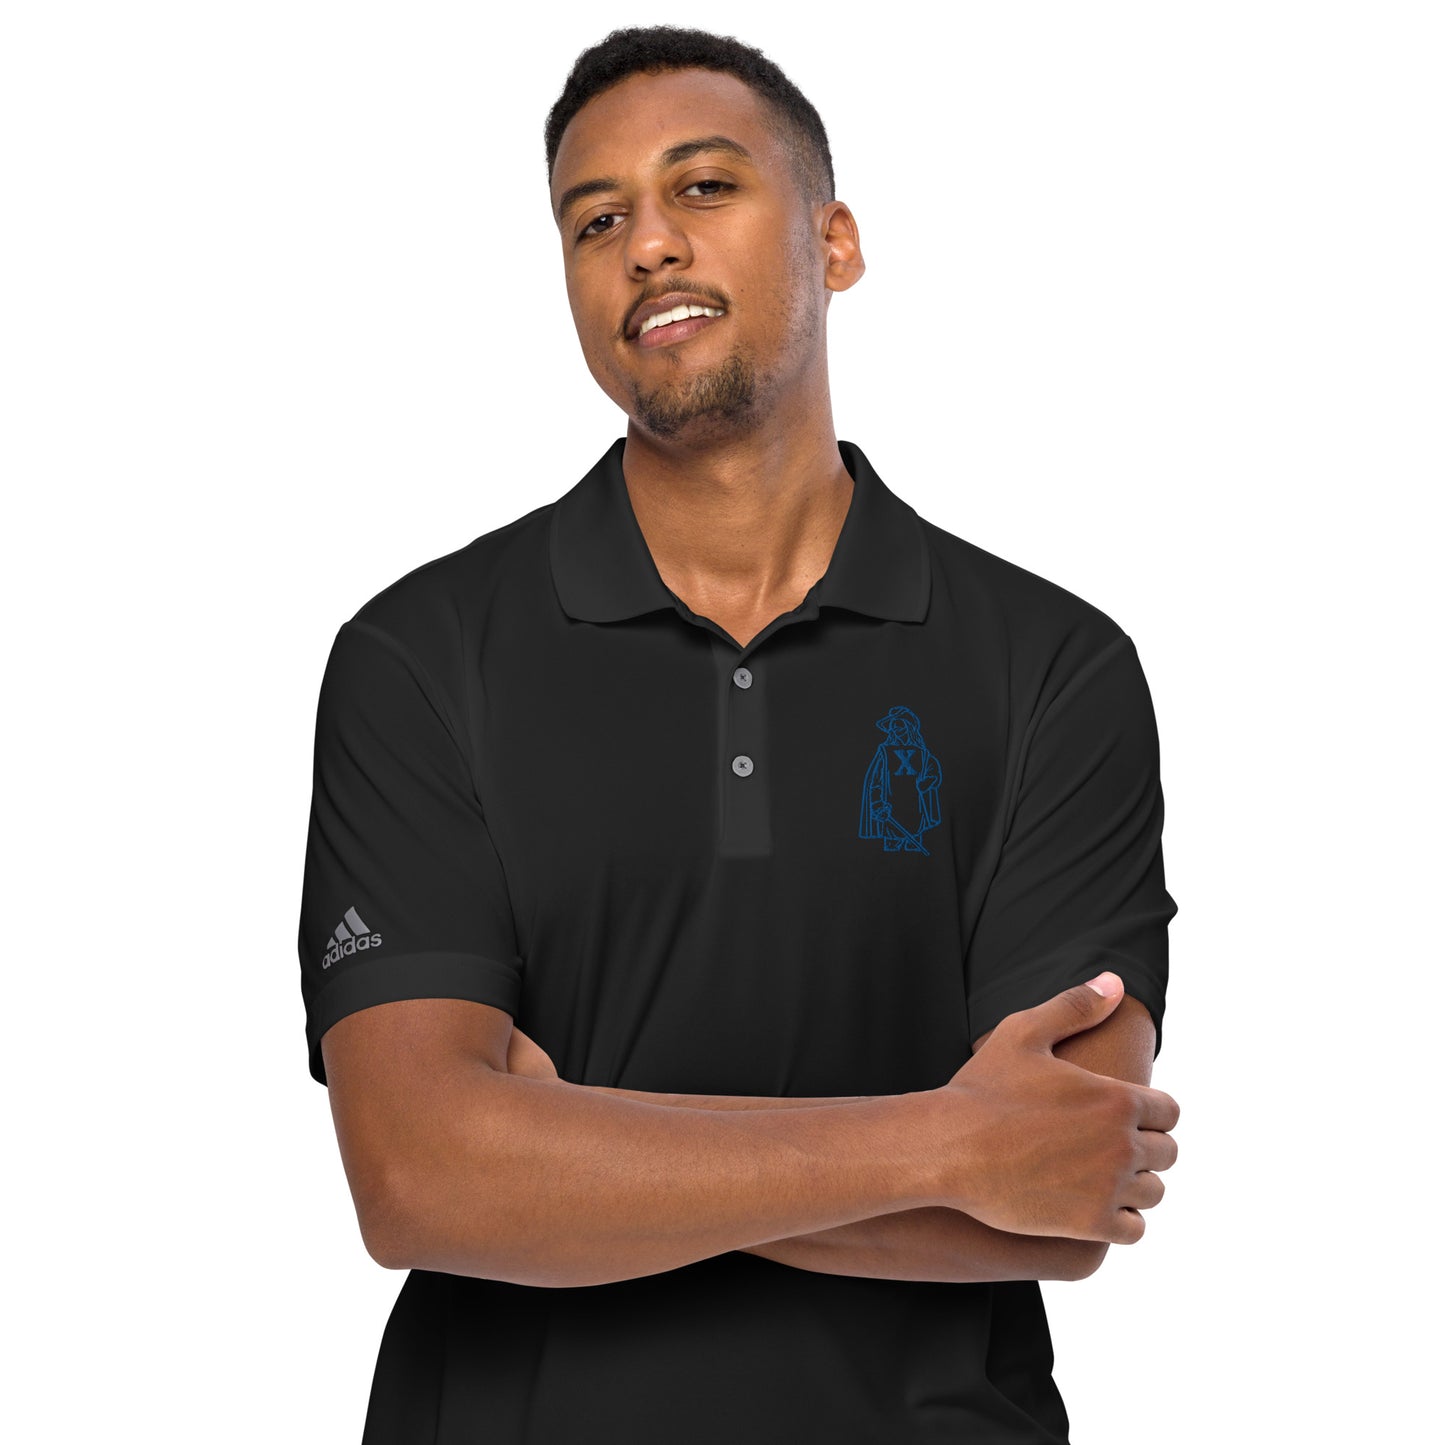 Navy Embroidered Muskie adidas performance polo shirt